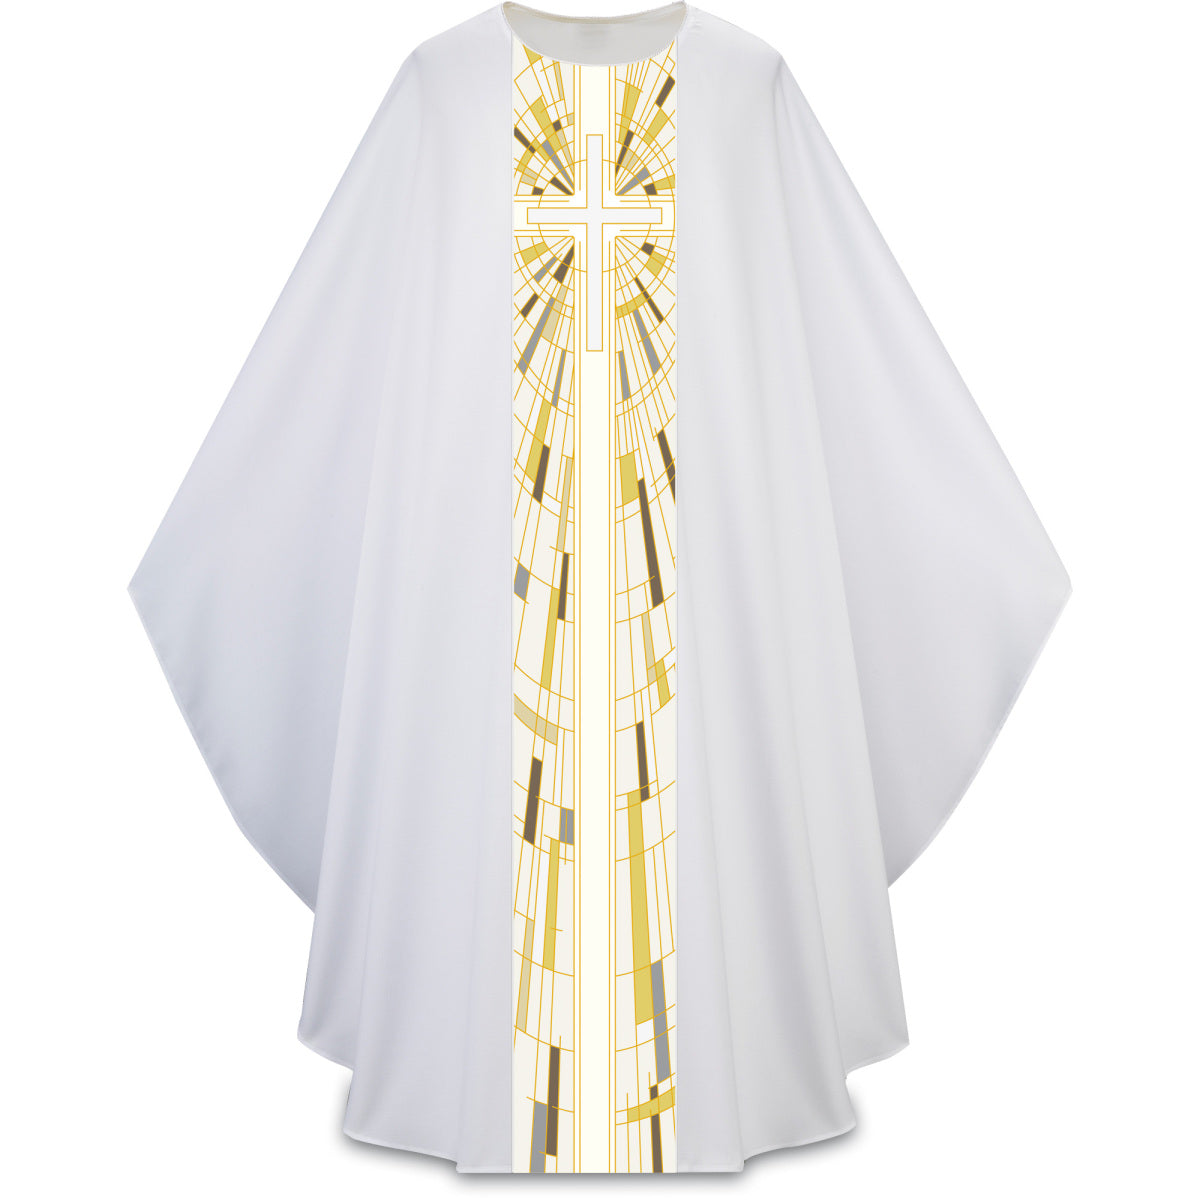 Priest Chasuble | Stained Glass Cross Motif in Pius